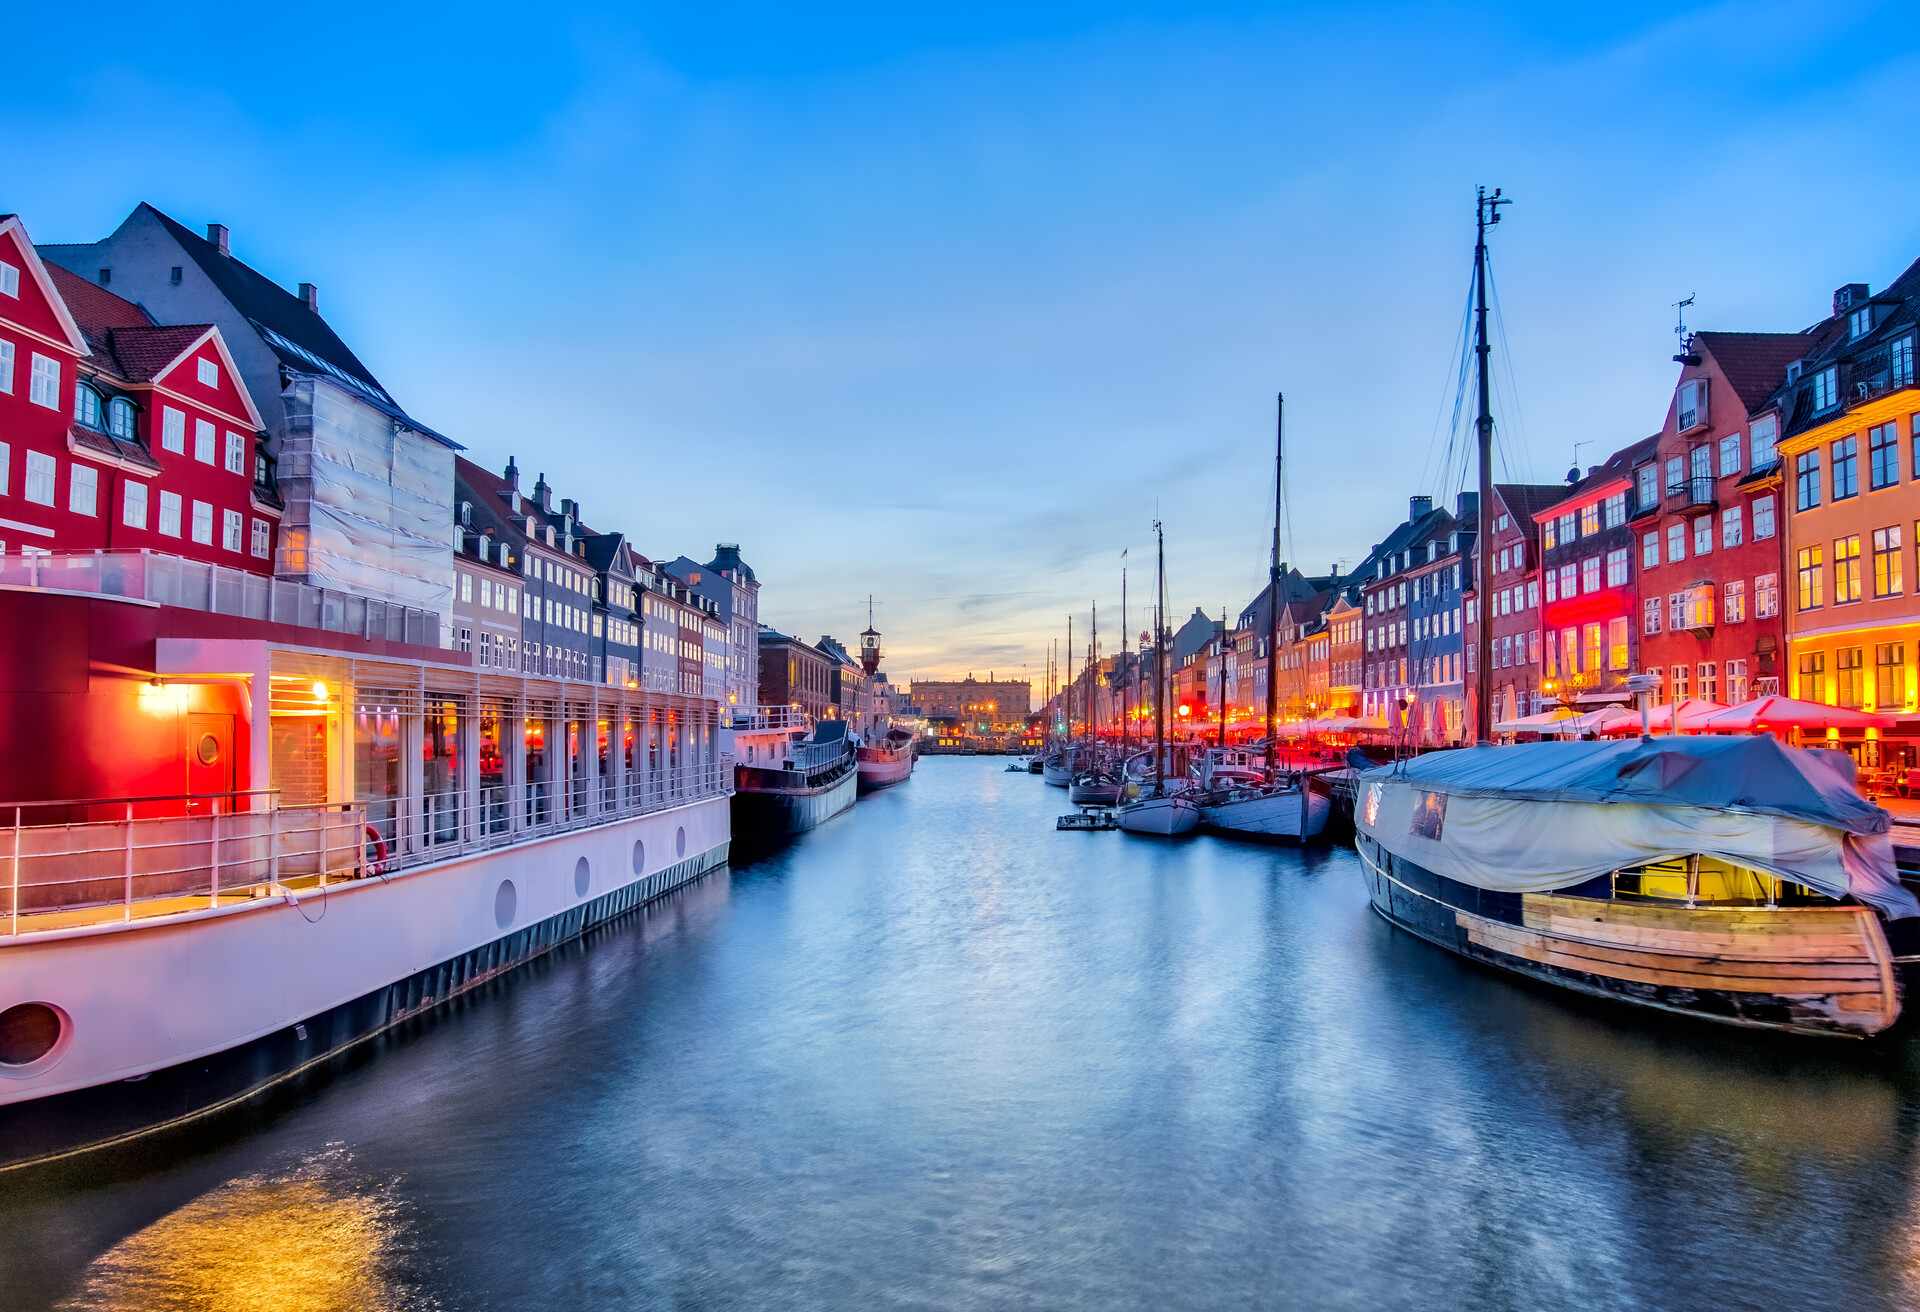 Nyhavn with its picturesque harbor with old sailing ships and colorful facades of old houses in Copenhagen, Denmark.; Shutterstock ID 662549035; Purpose: Image for OOH ad; Brand (KAYAK, Momondo, Any): KAYAK